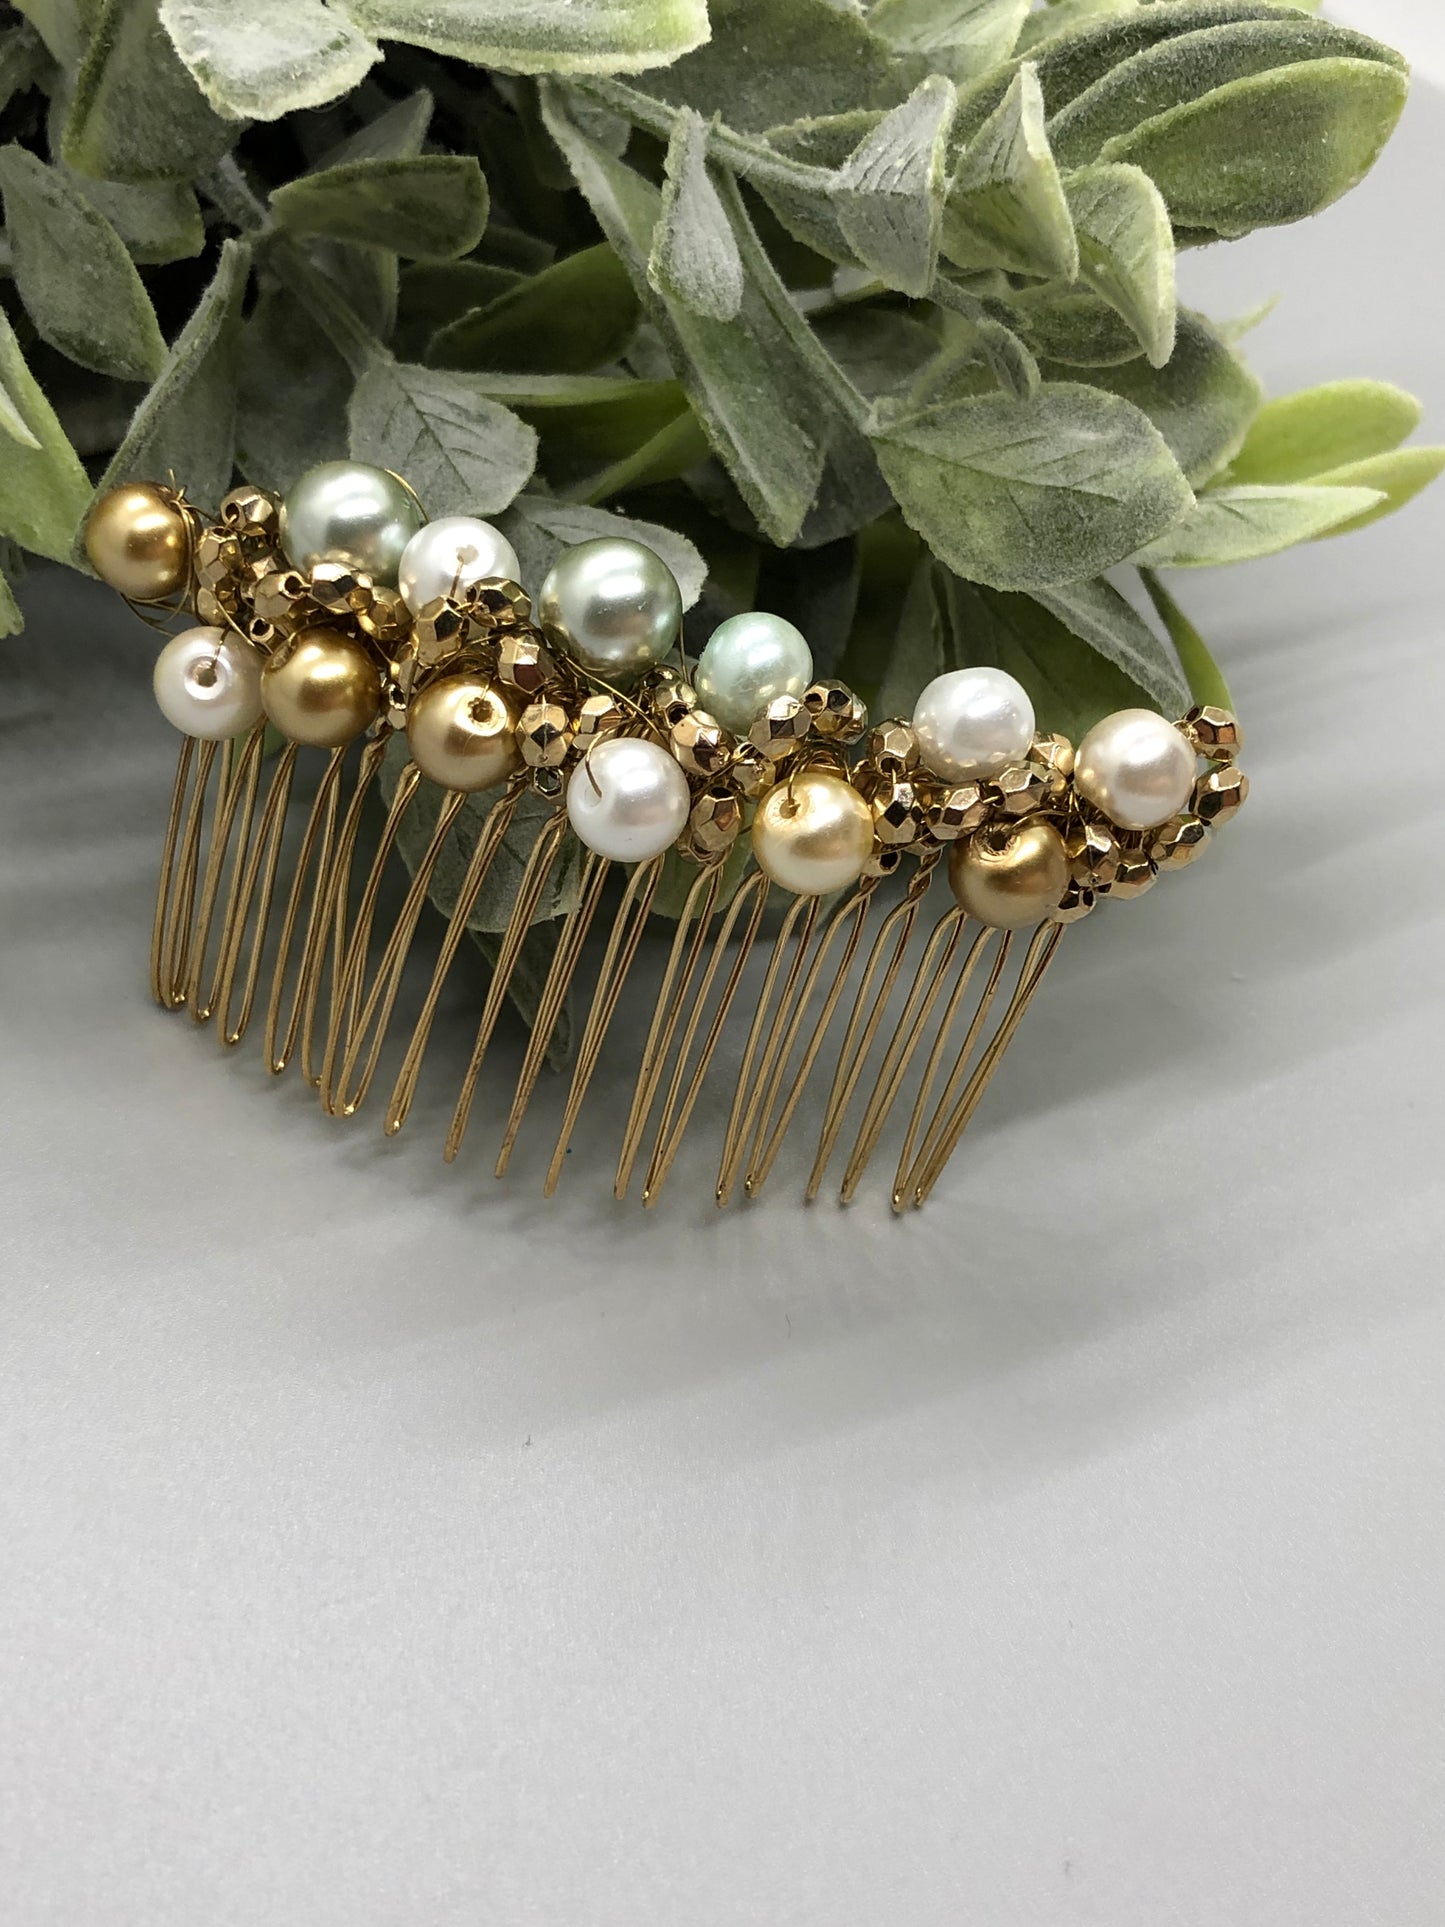 Gold White Gray Metallic Beaded Hair Comb 3.5' Gold Comb  Retro Bridal Prom Wedding Party